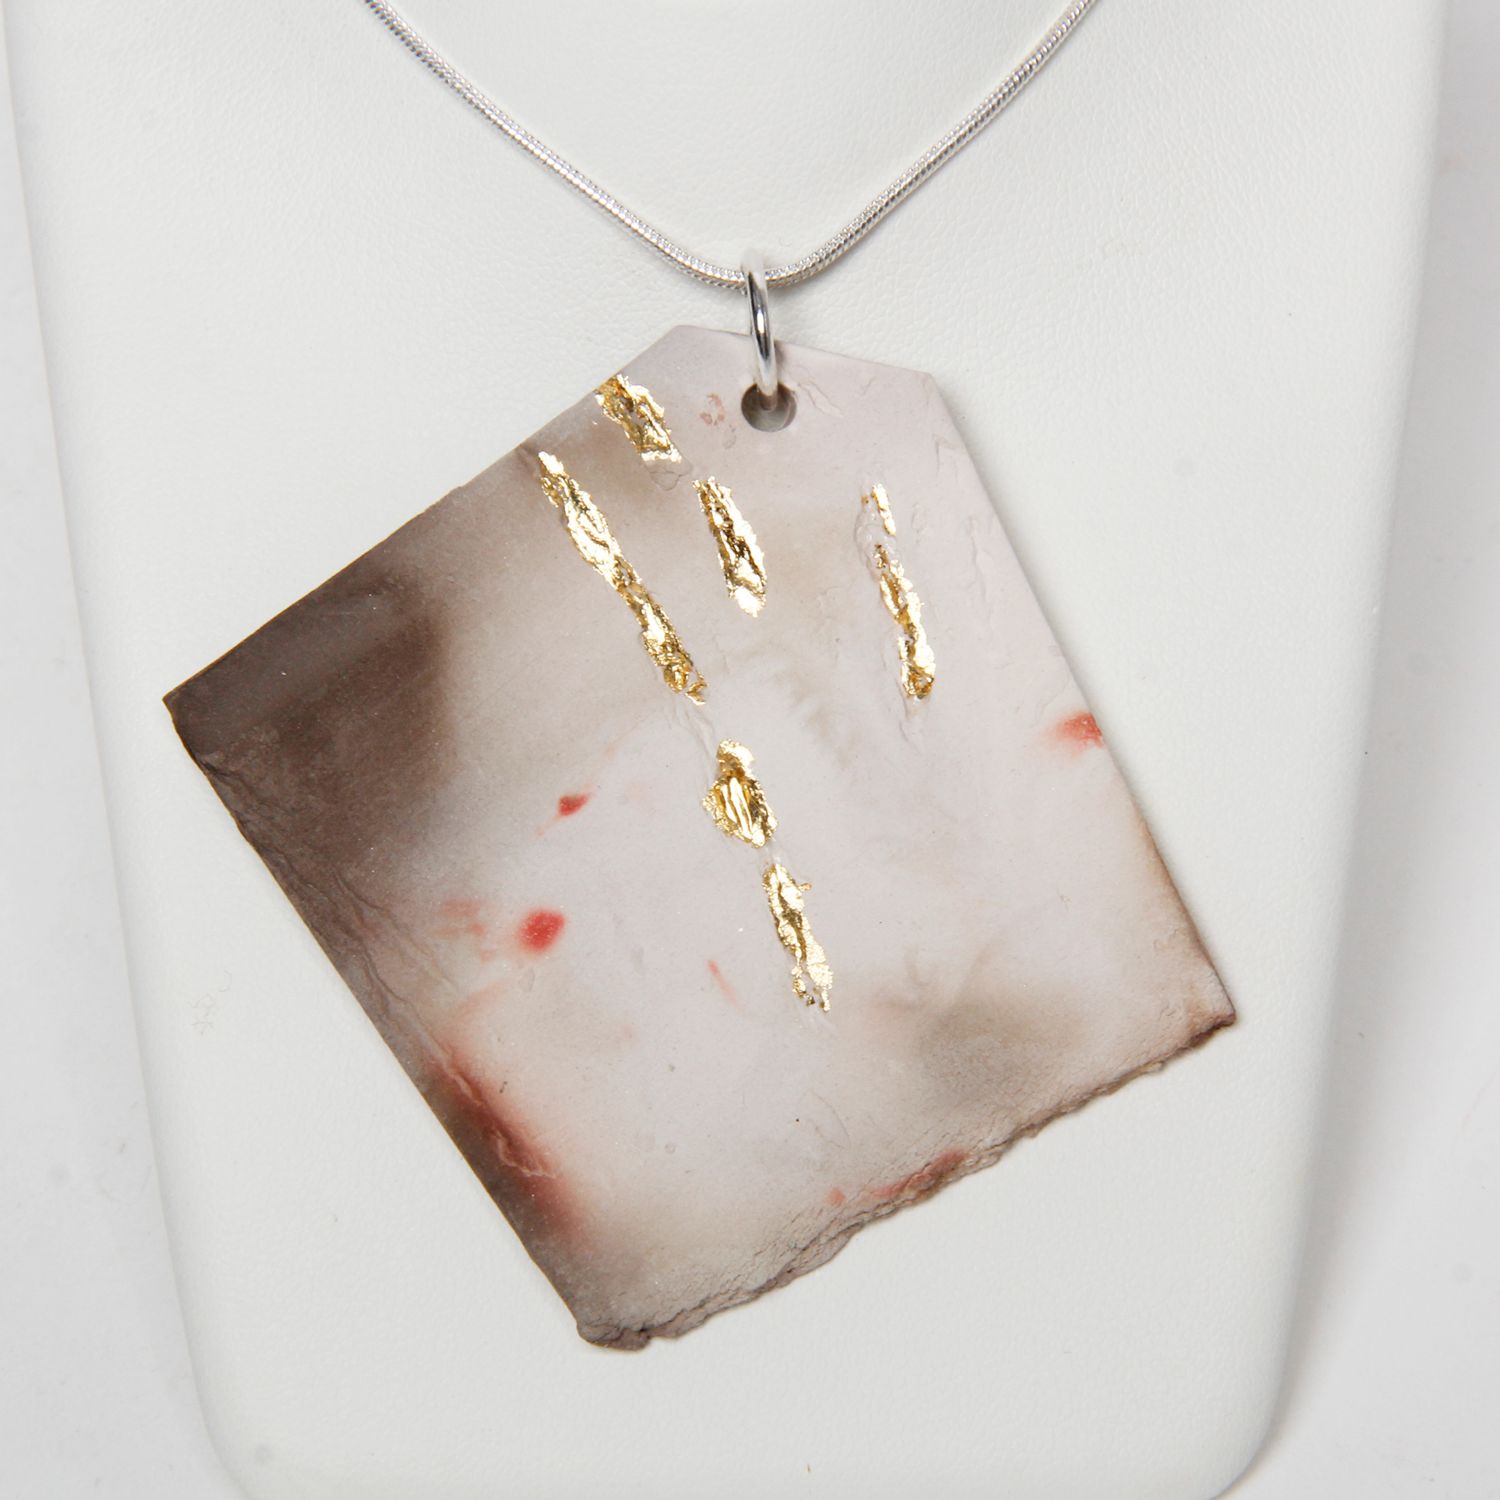 Susan Card: Necklace (Each sold separately) Product Image 4 of 8